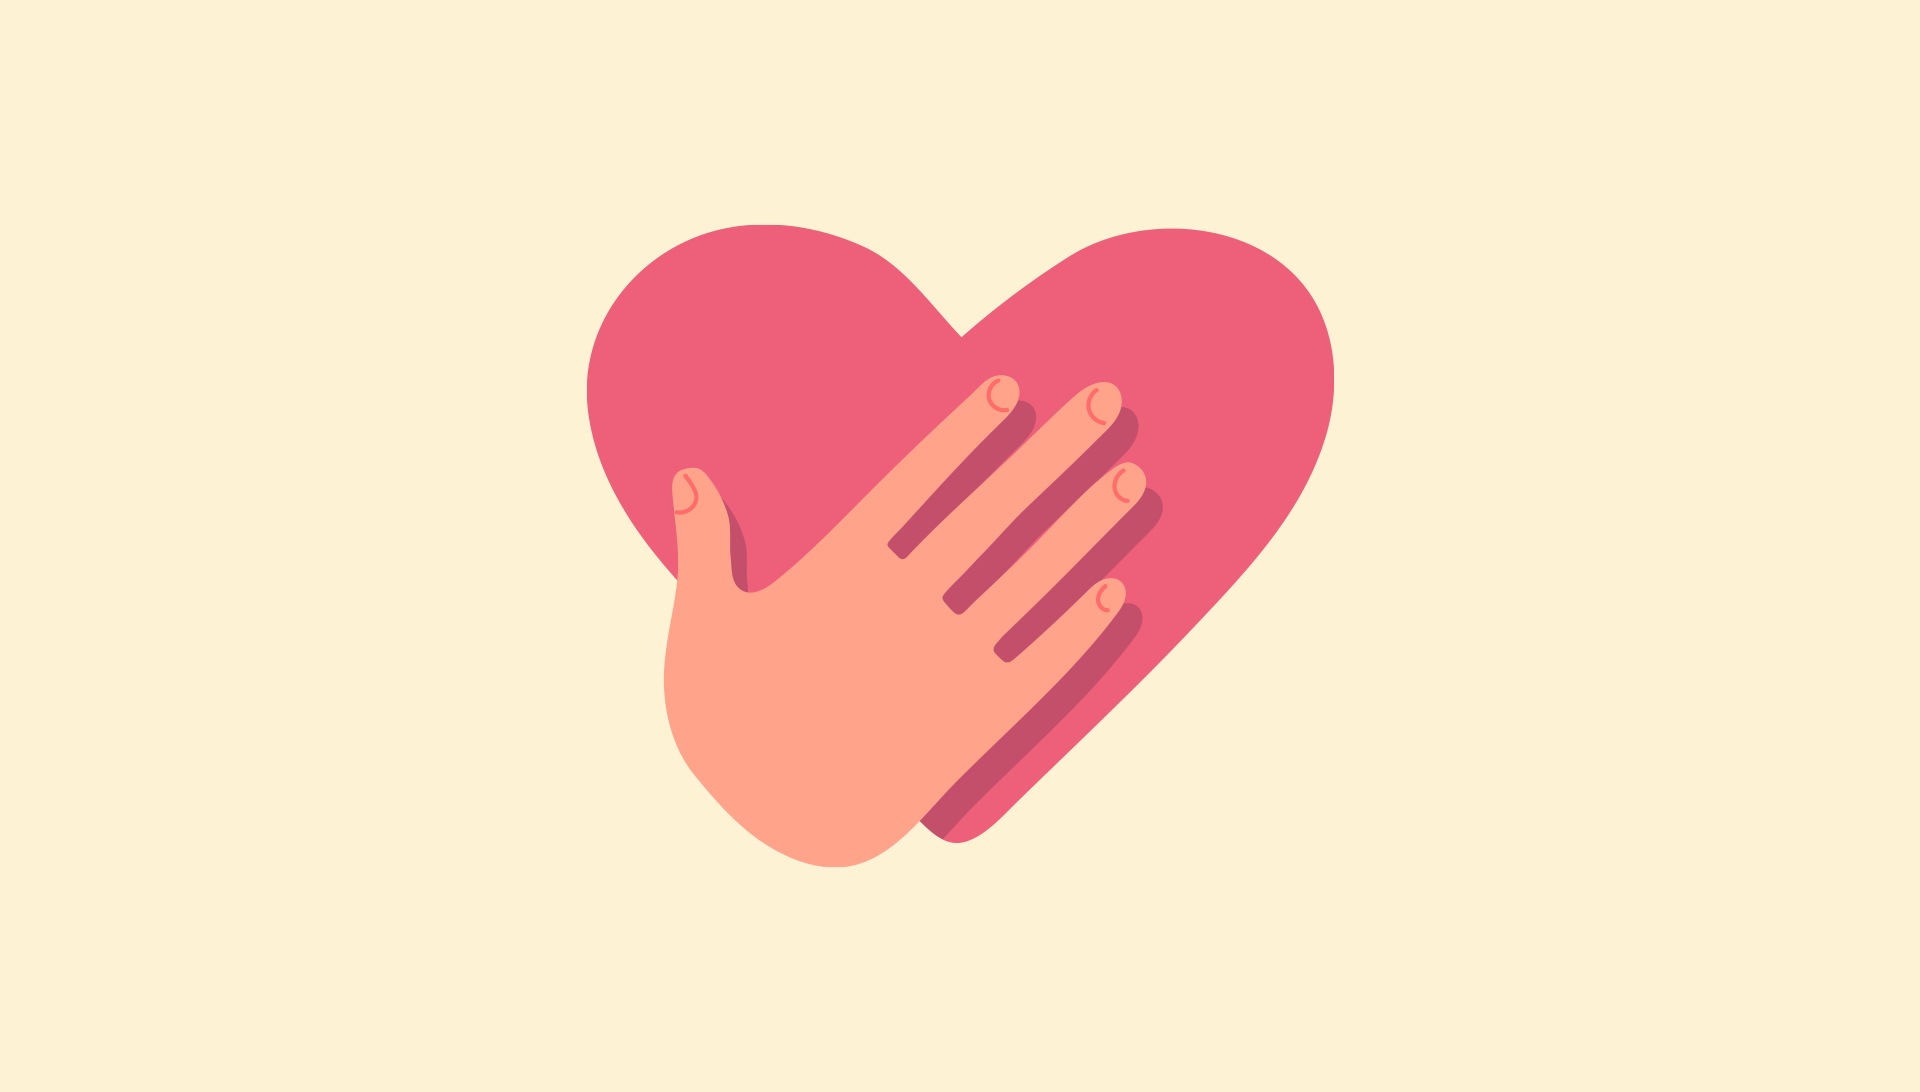 An illustration of a hand on a heart over a yellow background